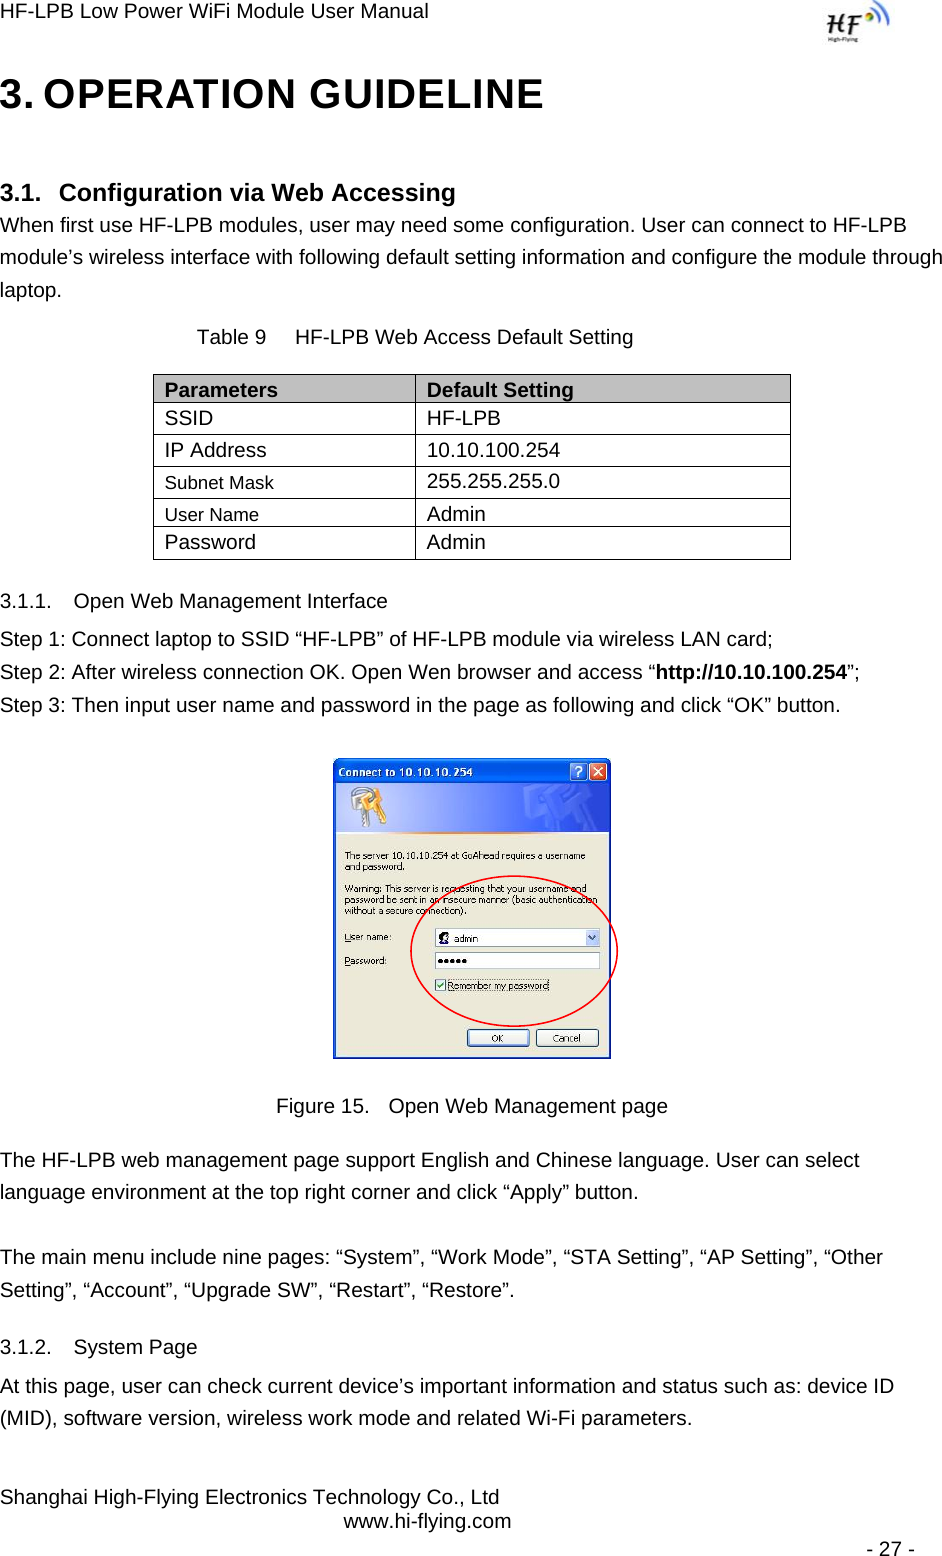 HF-LPB Low Power WiFi Module User Manual Shanghai High-Flying Electronics Technology Co., Ltd www.hi-flying.com   - 27 - 3. OPERATION GUIDELINE 3.1. Configuration via Web Accessing When first use HF-LPB modules, user may need some configuration. User can connect to HF-LPB module’s wireless interface with following default setting information and configure the module through laptop.           Table 9     HF-LPB Web Access Default Setting Parameters  Default Setting SSID HF-LPB IP Address  10.10.100.254 Subnet Mask 255.255.255.0 User Name Admin Password Admin 3.1.1.  Open Web Management Interface Step 1: Connect laptop to SSID “HF-LPB” of HF-LPB module via wireless LAN card; Step 2: After wireless connection OK. Open Wen browser and access “http://10.10.100.254”; Step 3: Then input user name and password in the page as following and click “OK” button.  Figure 15.  Open Web Management page The HF-LPB web management page support English and Chinese language. User can select language environment at the top right corner and click “Apply” button.  The main menu include nine pages: “System”, “Work Mode”, “STA Setting”, “AP Setting”, “Other Setting”, “Account”, “Upgrade SW”, “Restart”, “Restore”. 3.1.2. System Page At this page, user can check current device’s important information and status such as: device ID (MID), software version, wireless work mode and related Wi-Fi parameters. 